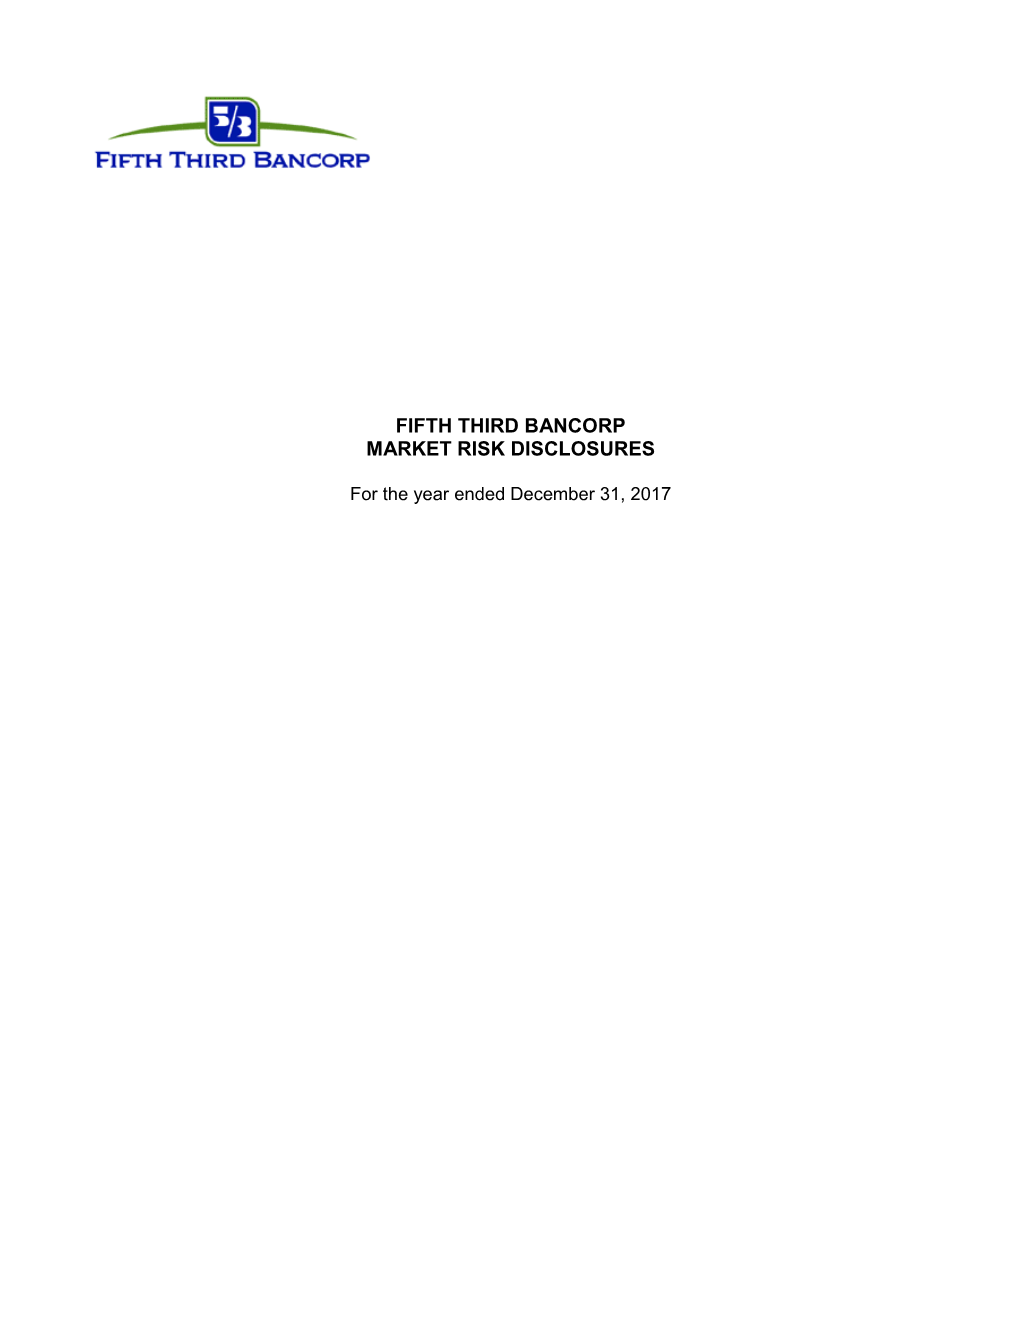 Fifth Third Bancorp Market Risk Disclosures